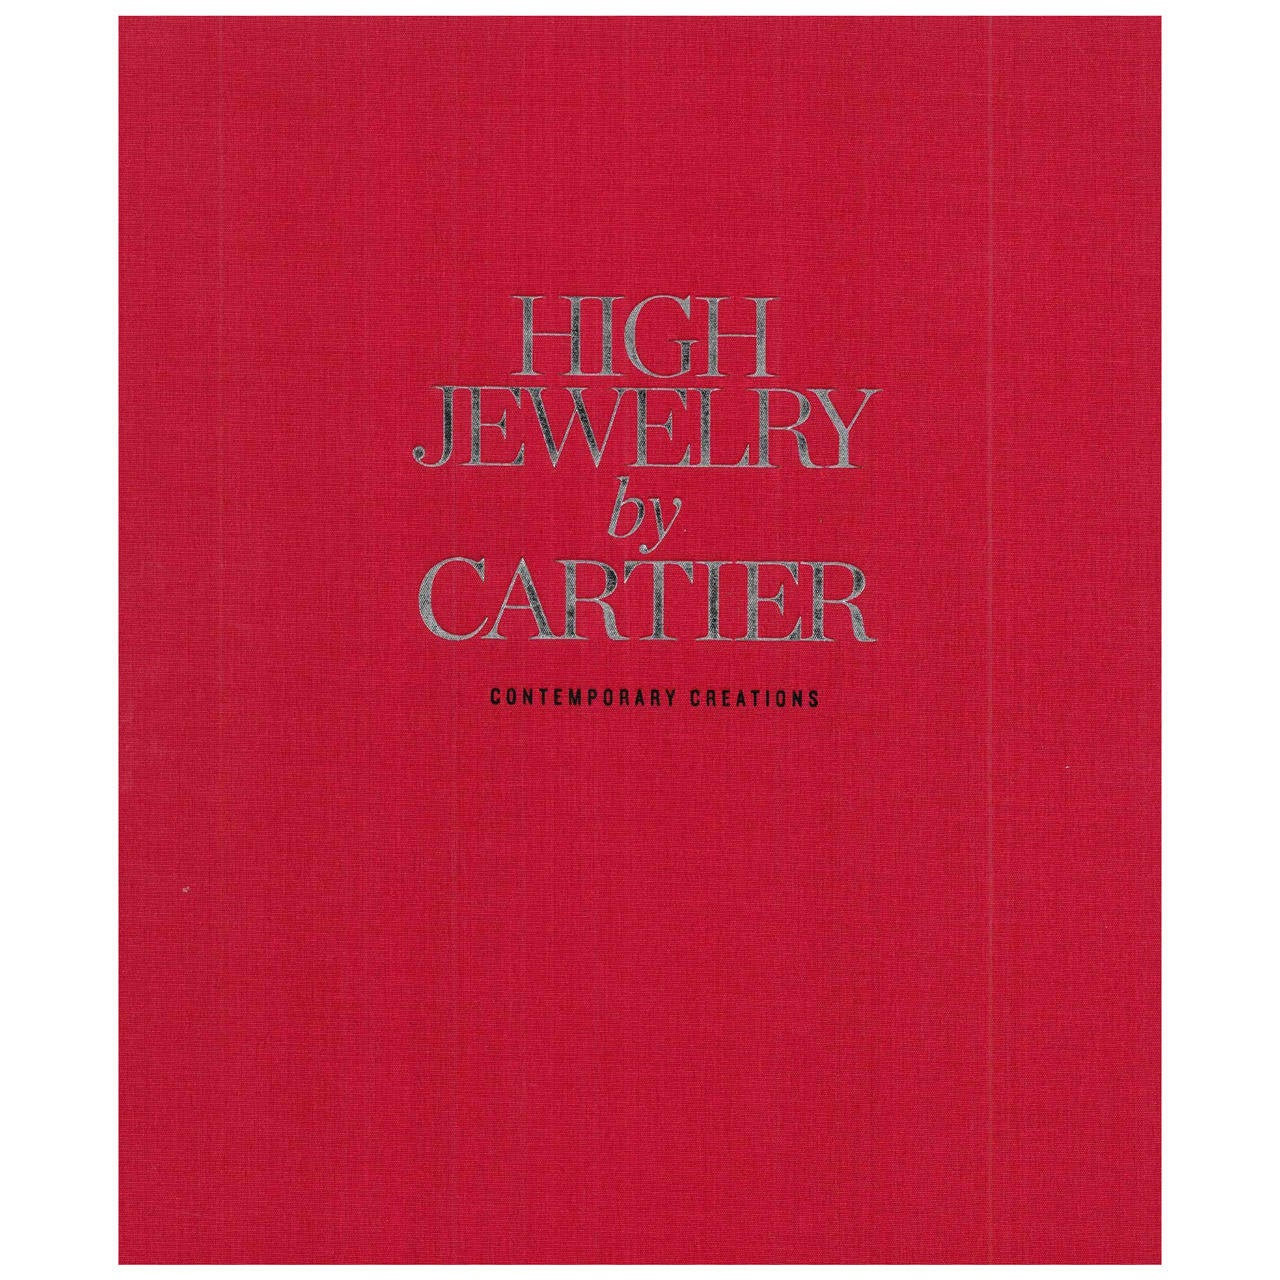 Book of HIGH JEWELRY by CARTIER - Contemporary Creations